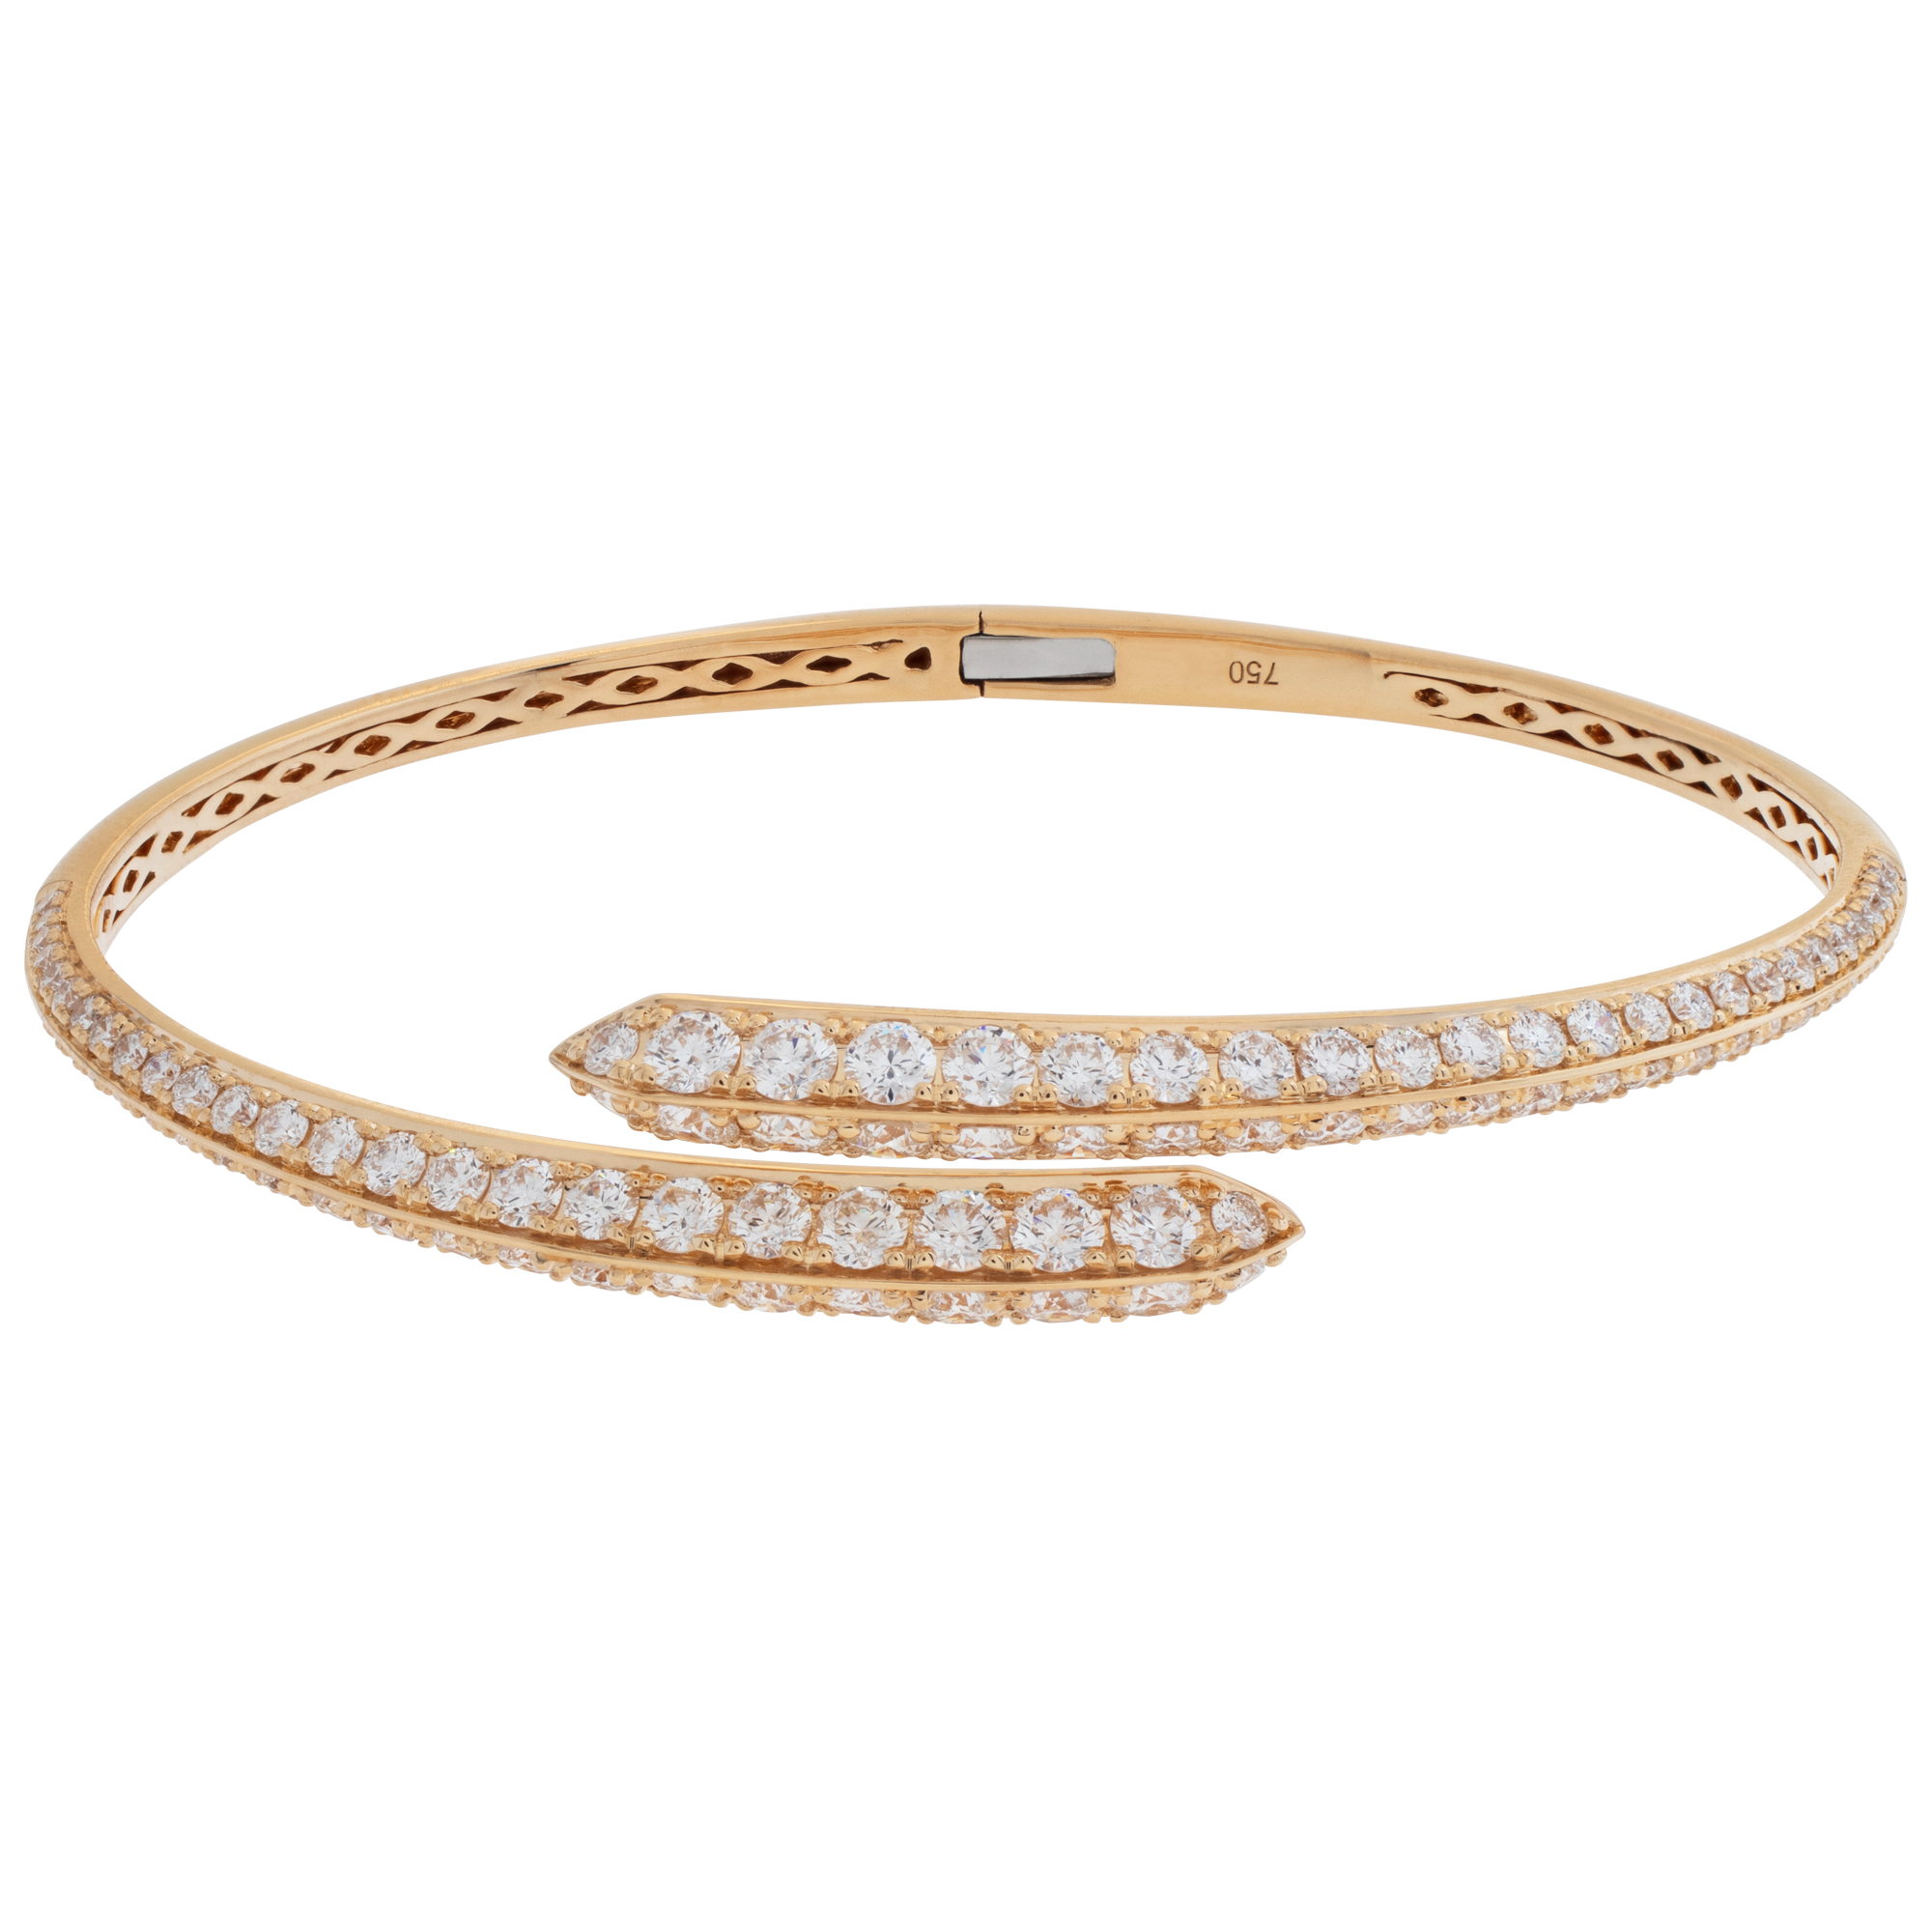 18k yellow gold bangle with 3.64 carats in diamonds. Fits up to 7.5'' wrist